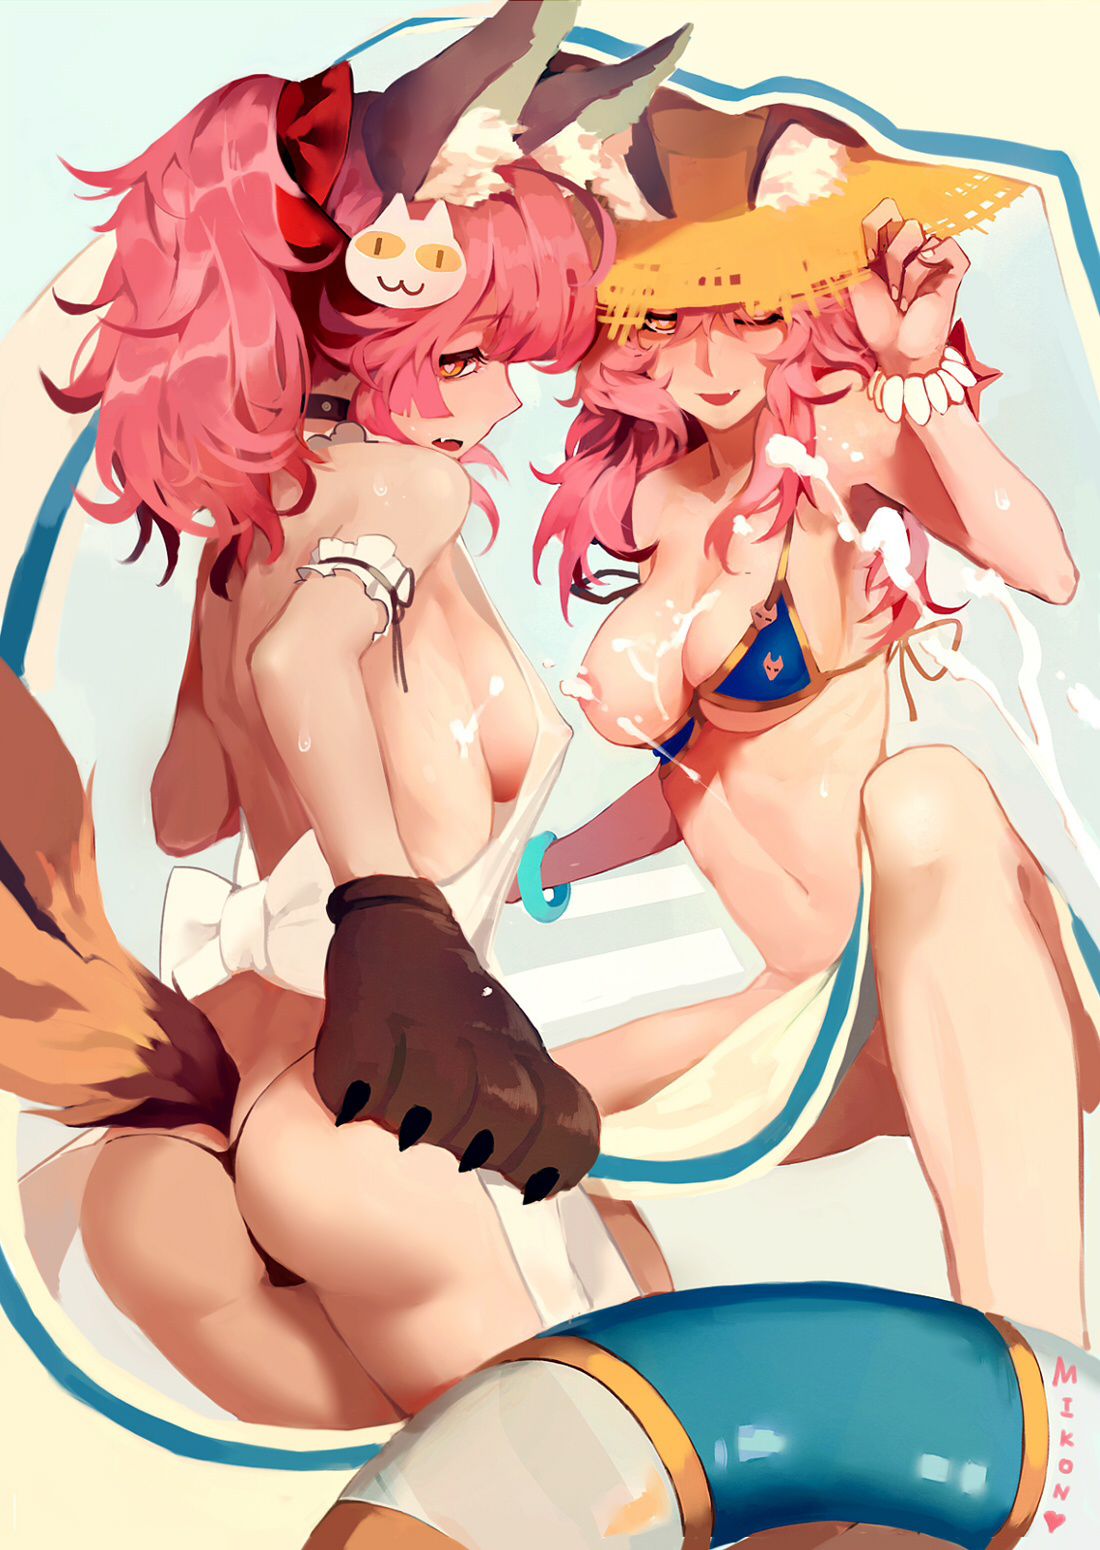 [Erotic image] Character image in front of Tamamo that you want to refer to fate erotic cosplay 12